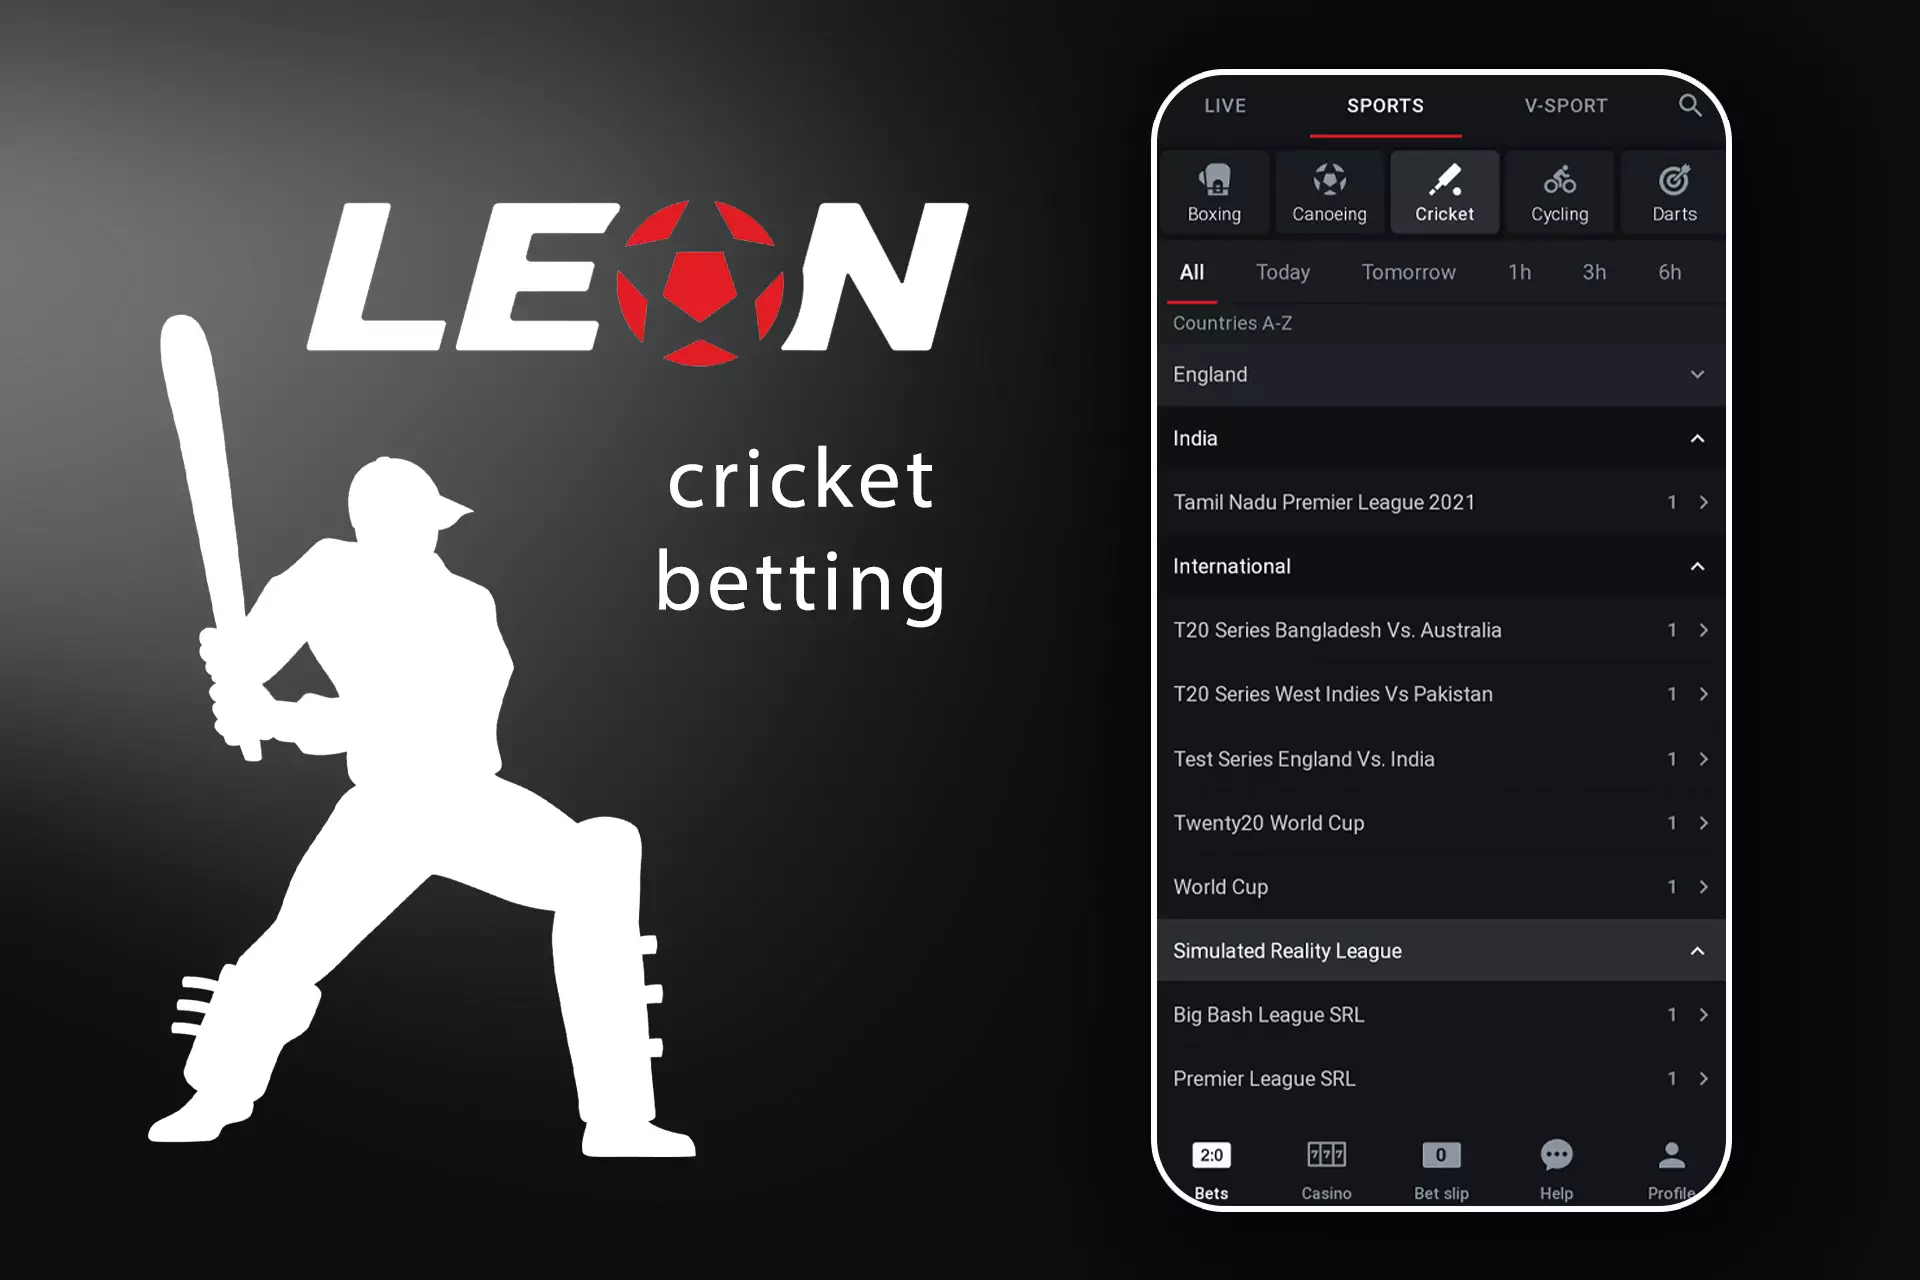 Choose the cricket match, make a deposit and place a bet.